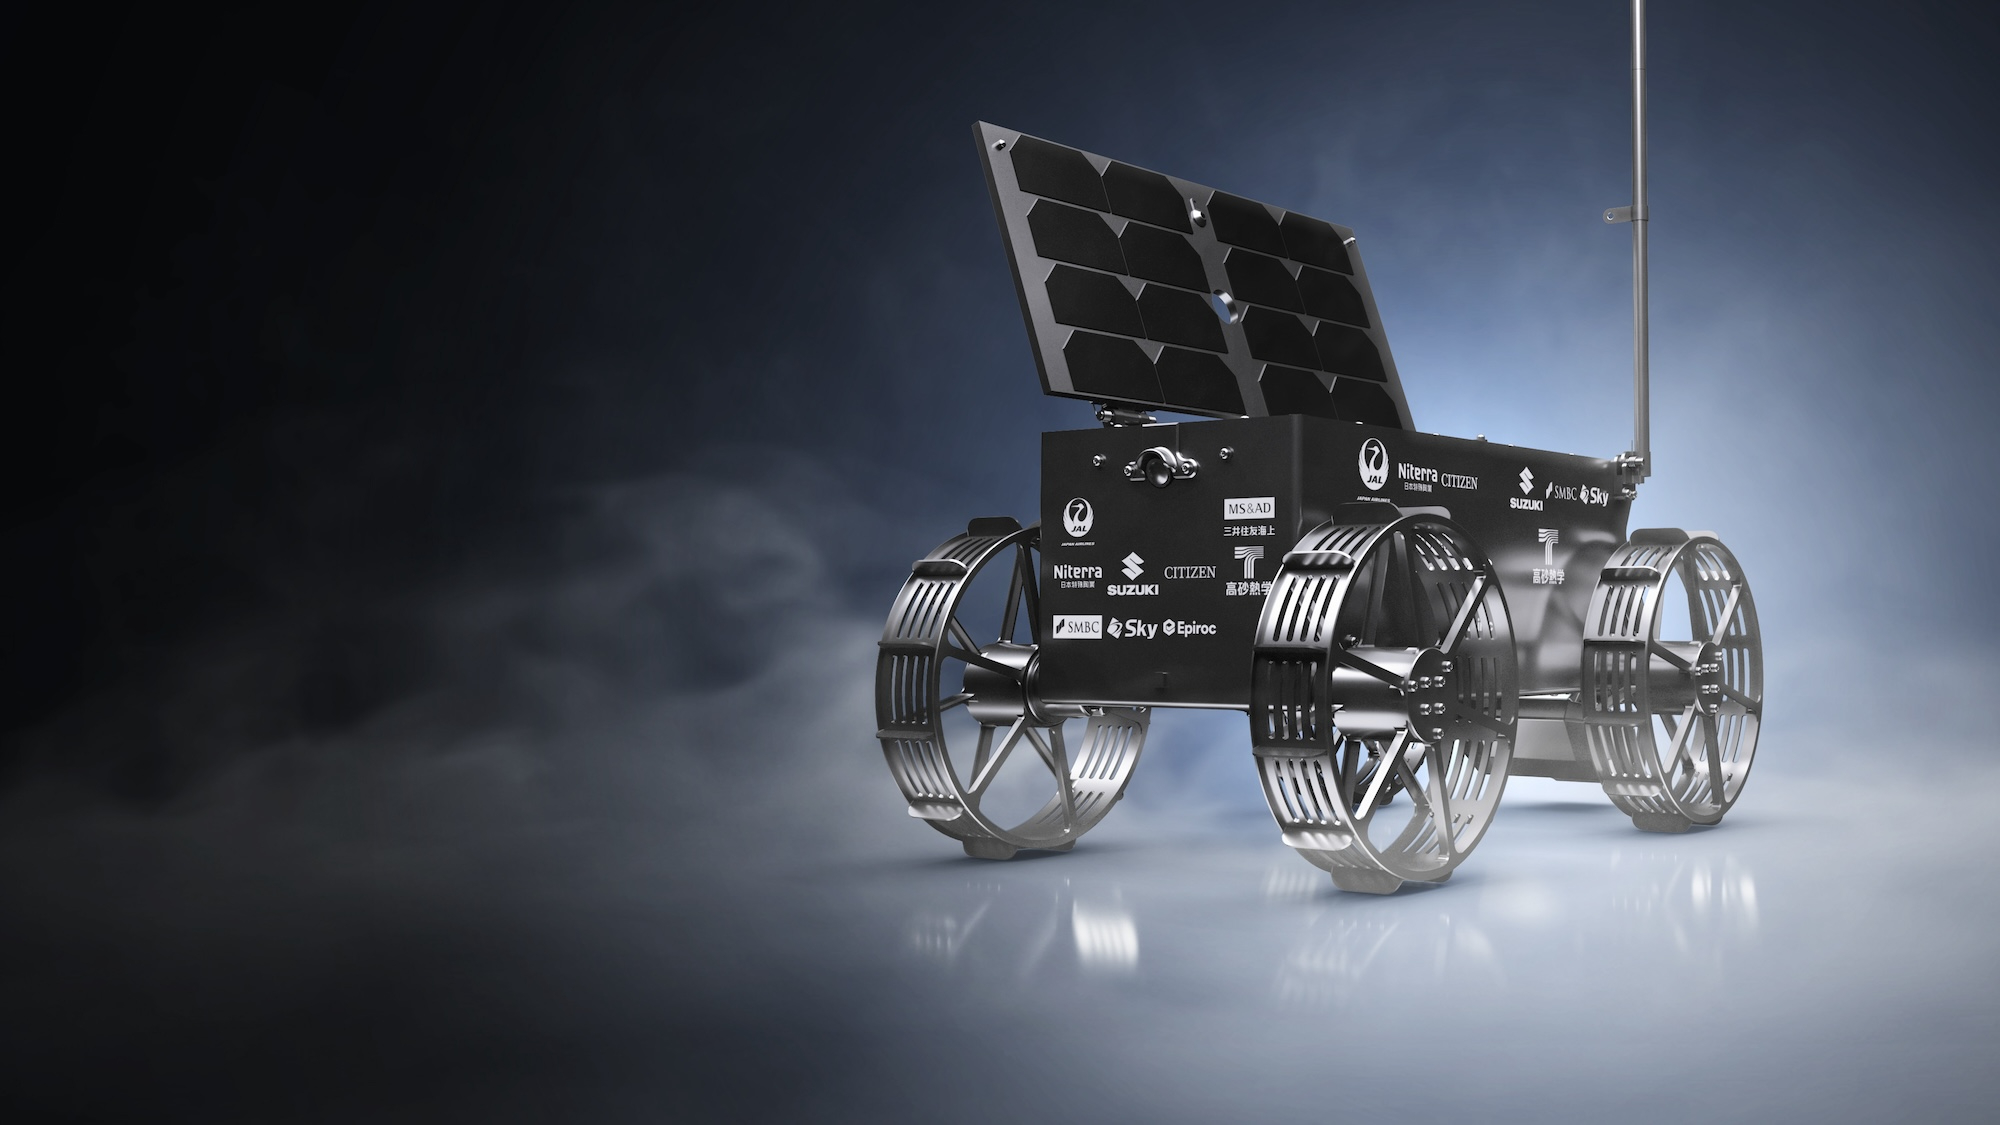 Japan’s ispace unveils micro rover for its 2nd moon mission Space